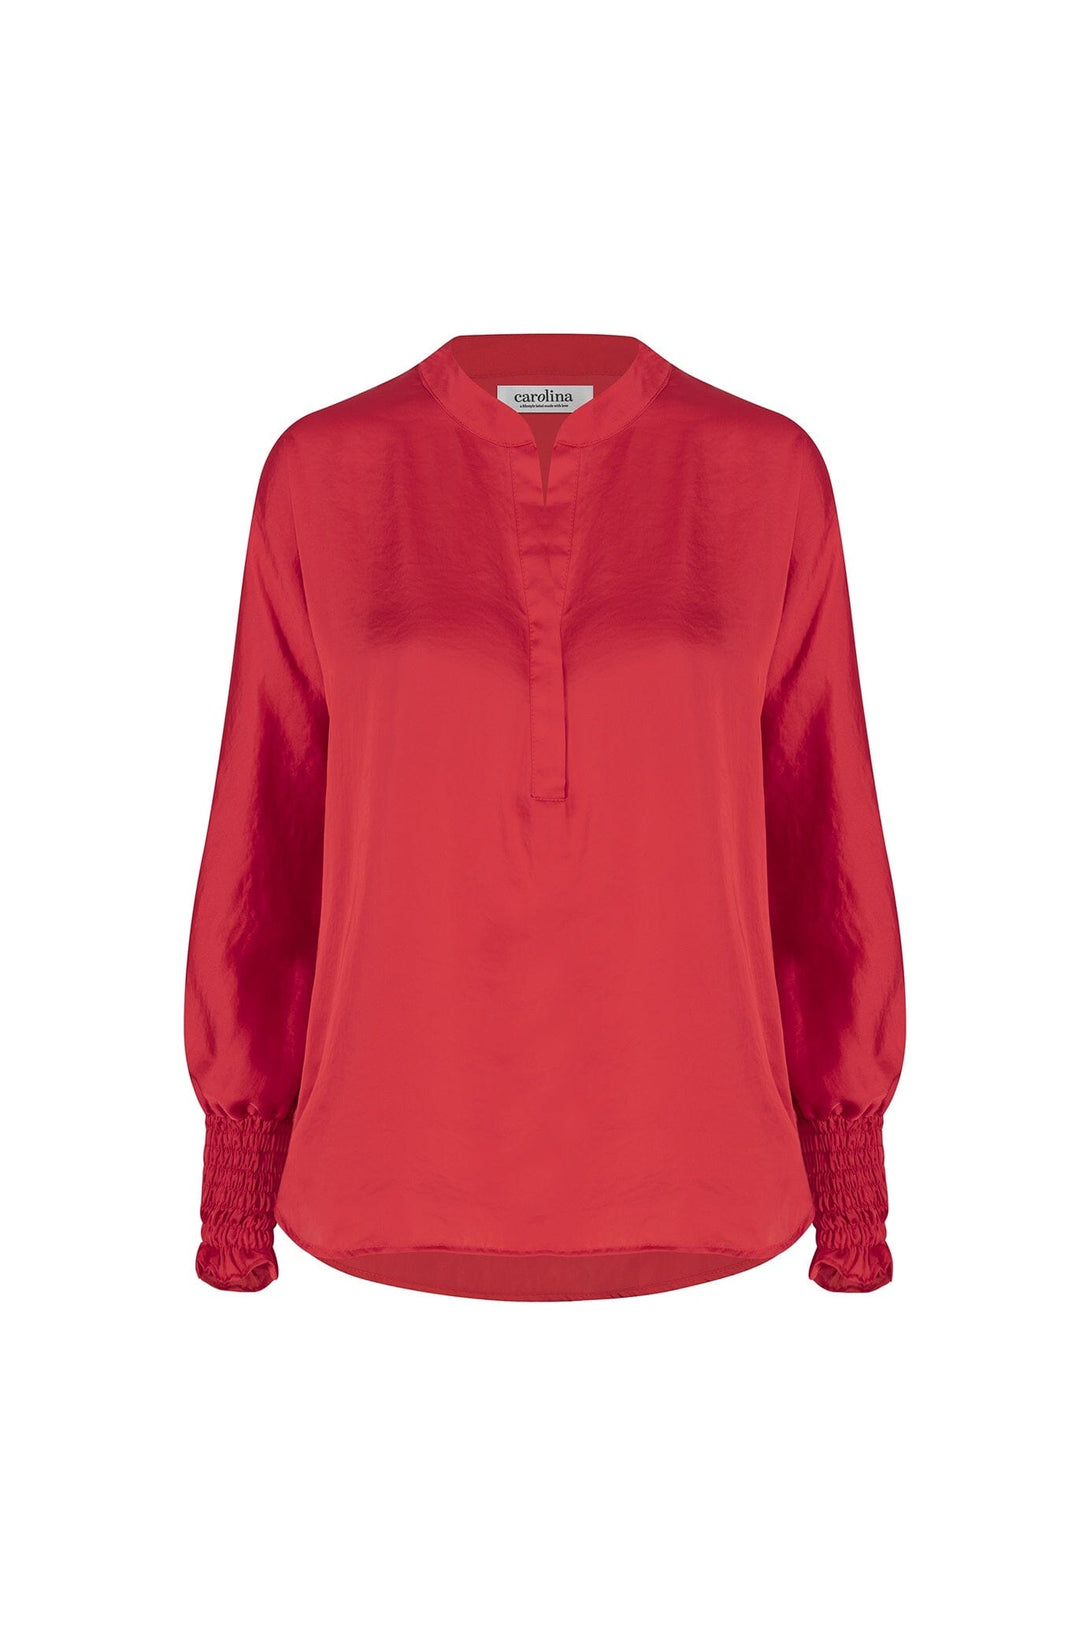 Angelina Long Sleeve Top Red Tops